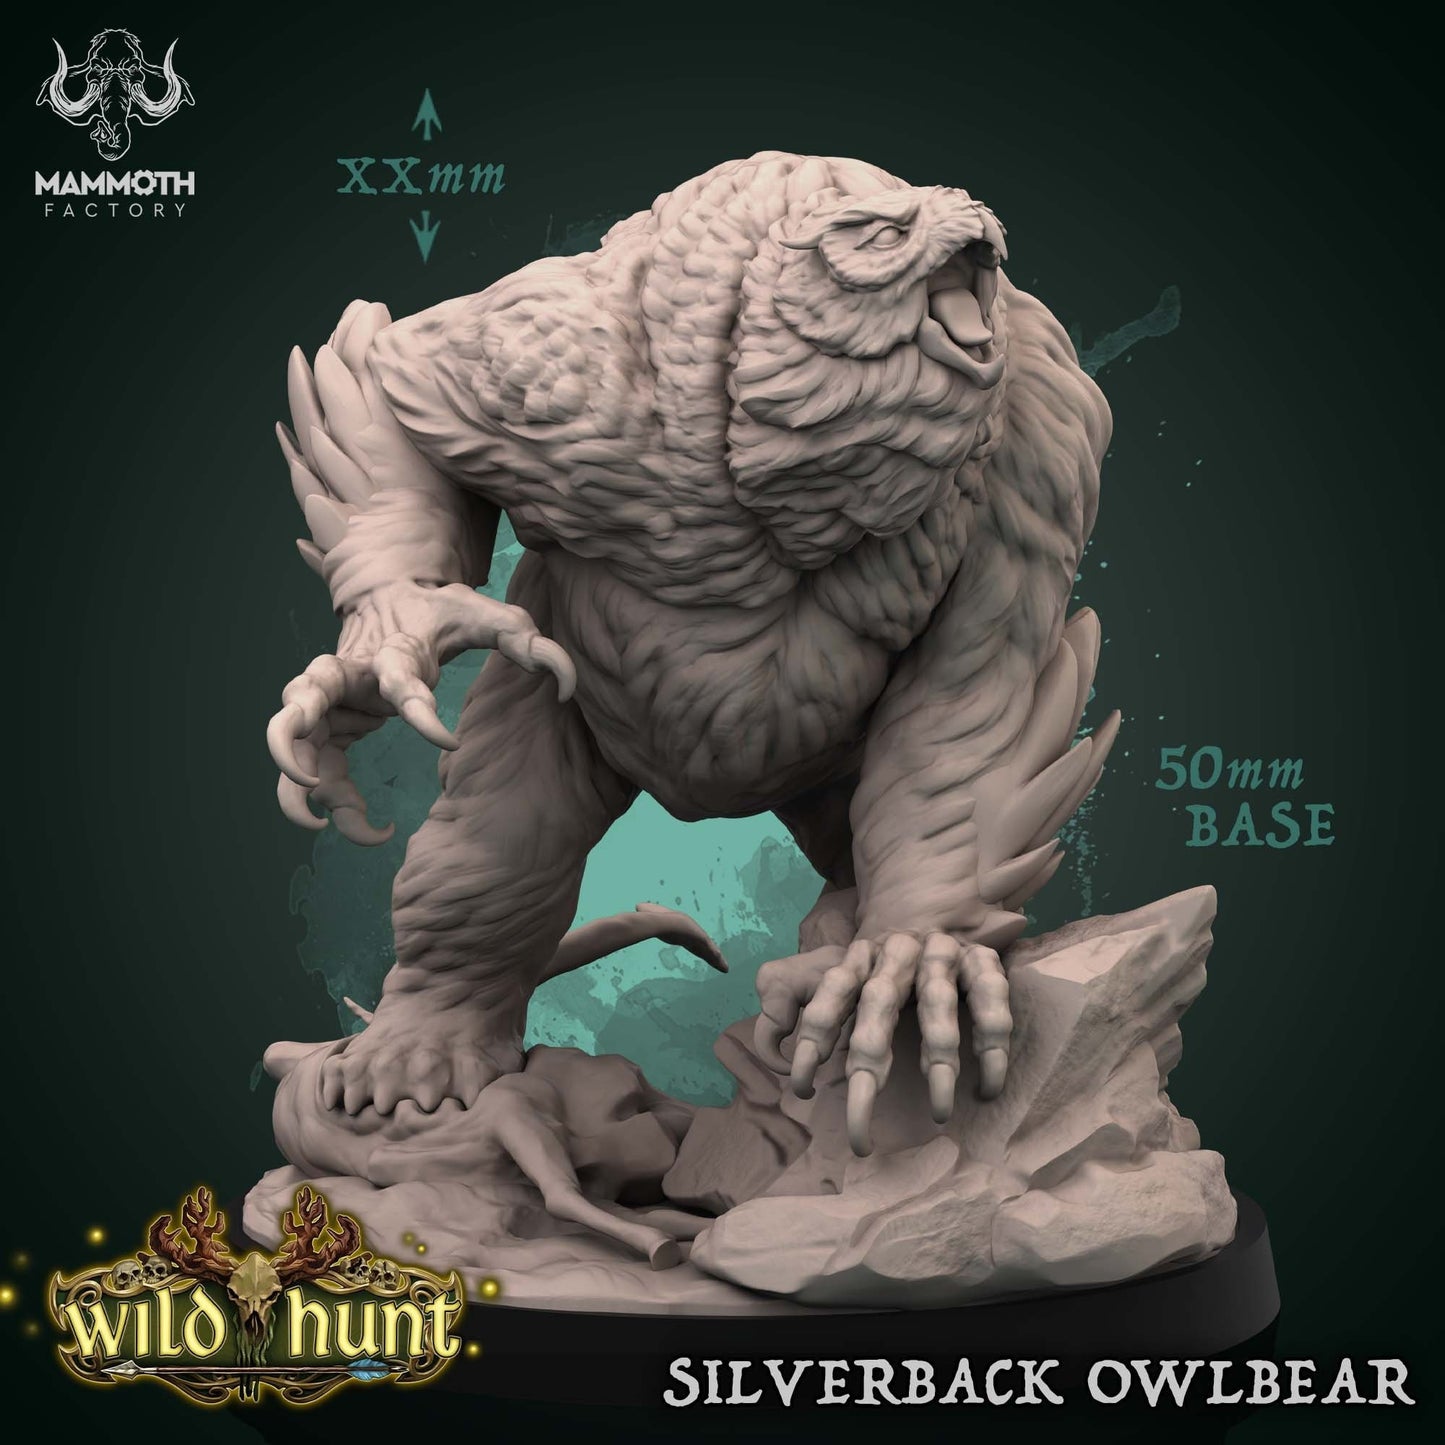 Silverback Owlbear | Mammoth Factory | 3D Printed Resin Miniature | Dungeons and Dragons | Pathfinder | Tabletop Role Playing | AoS |D&D